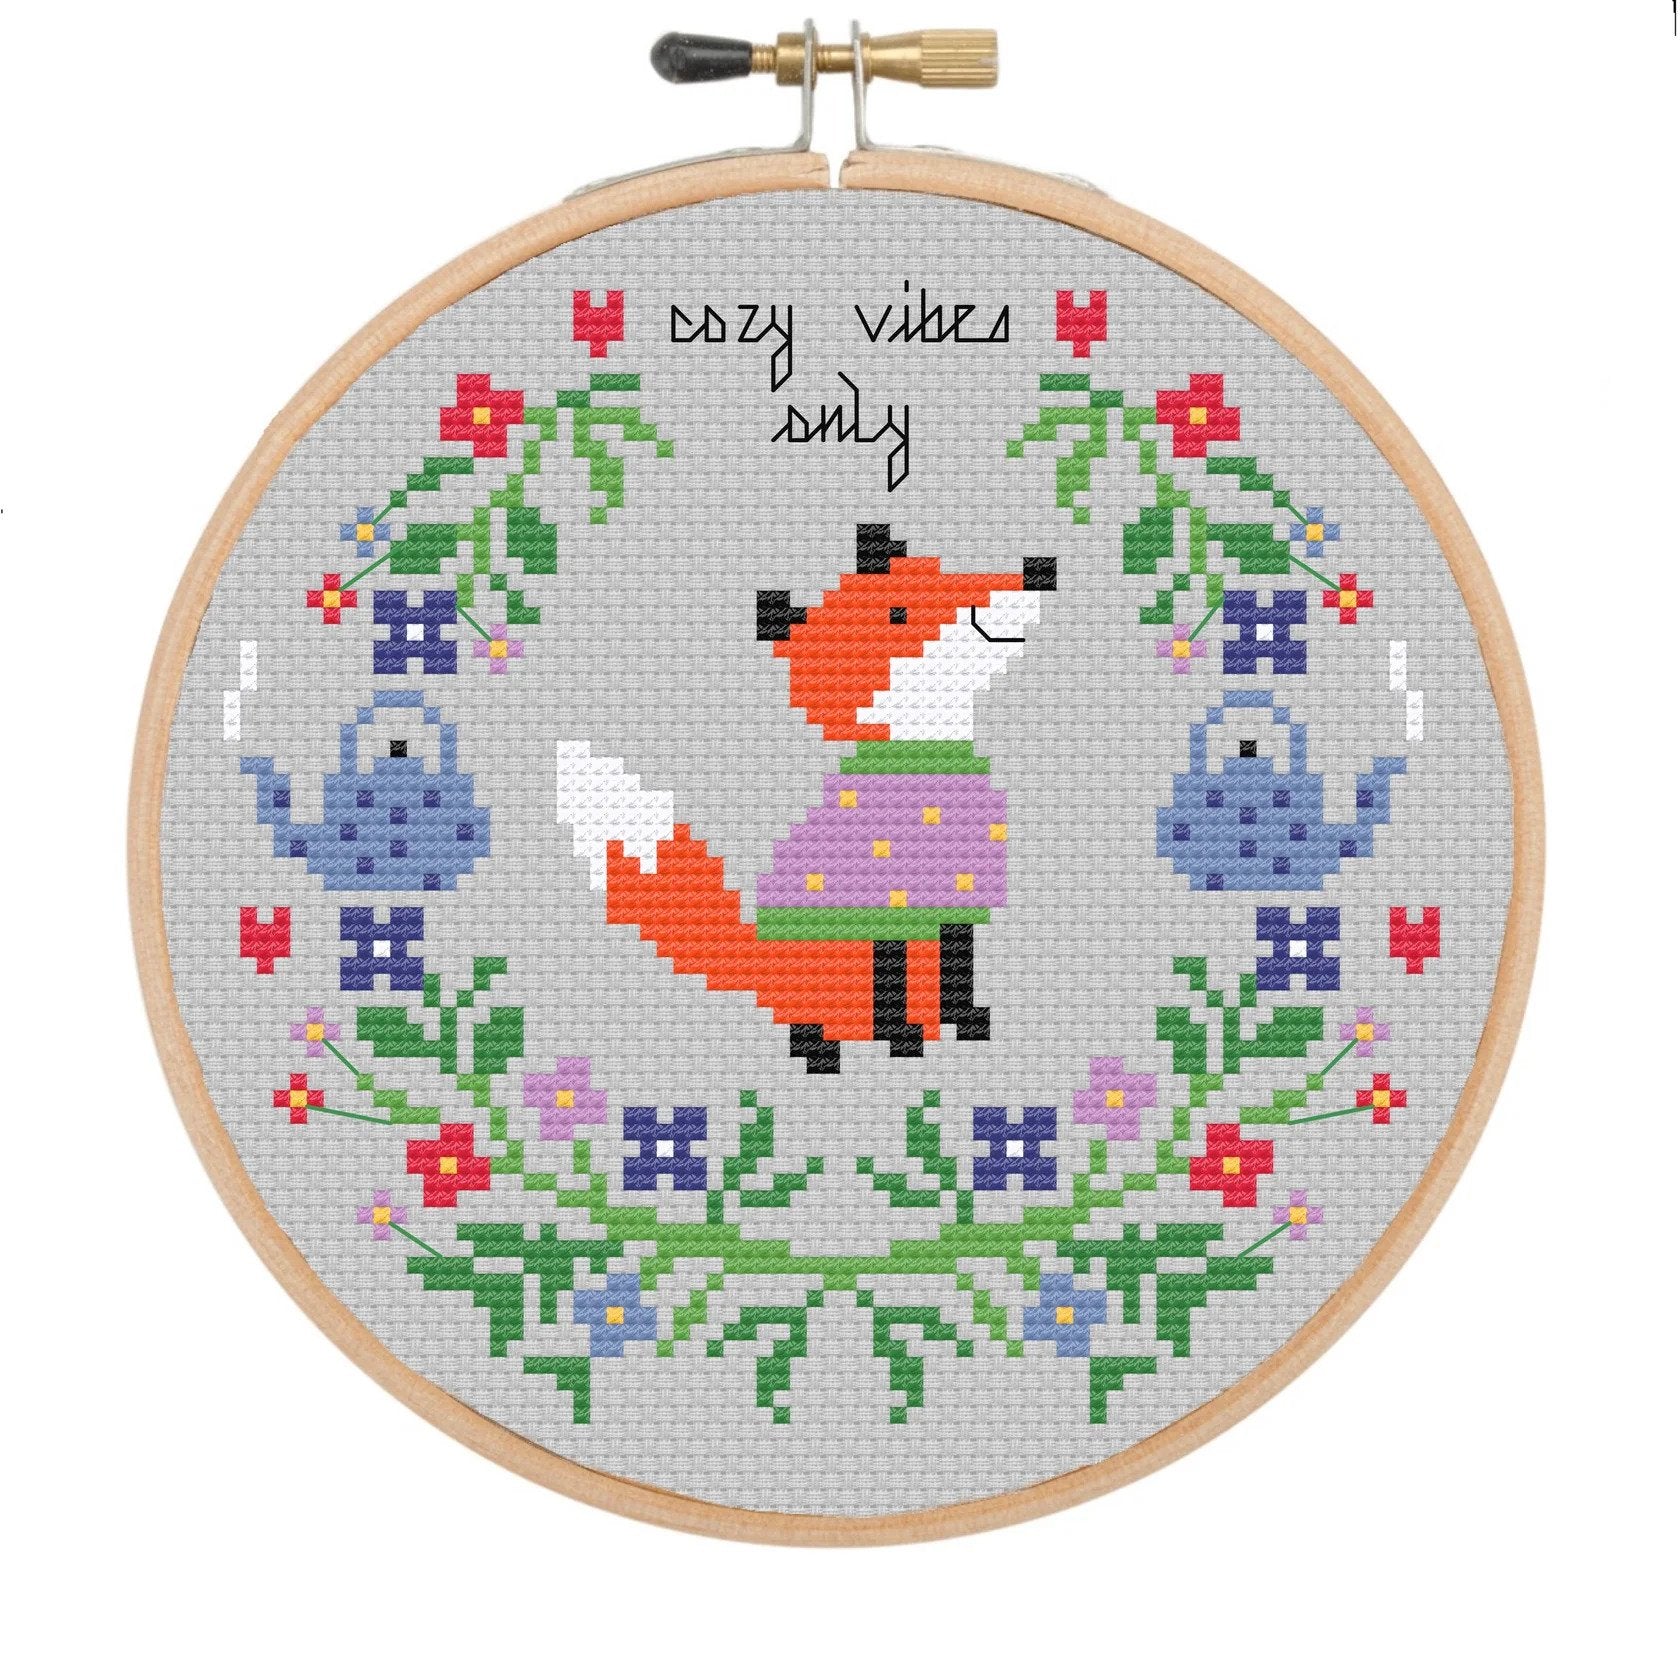 "Cozy vibes only" fox and flowers cross stitch